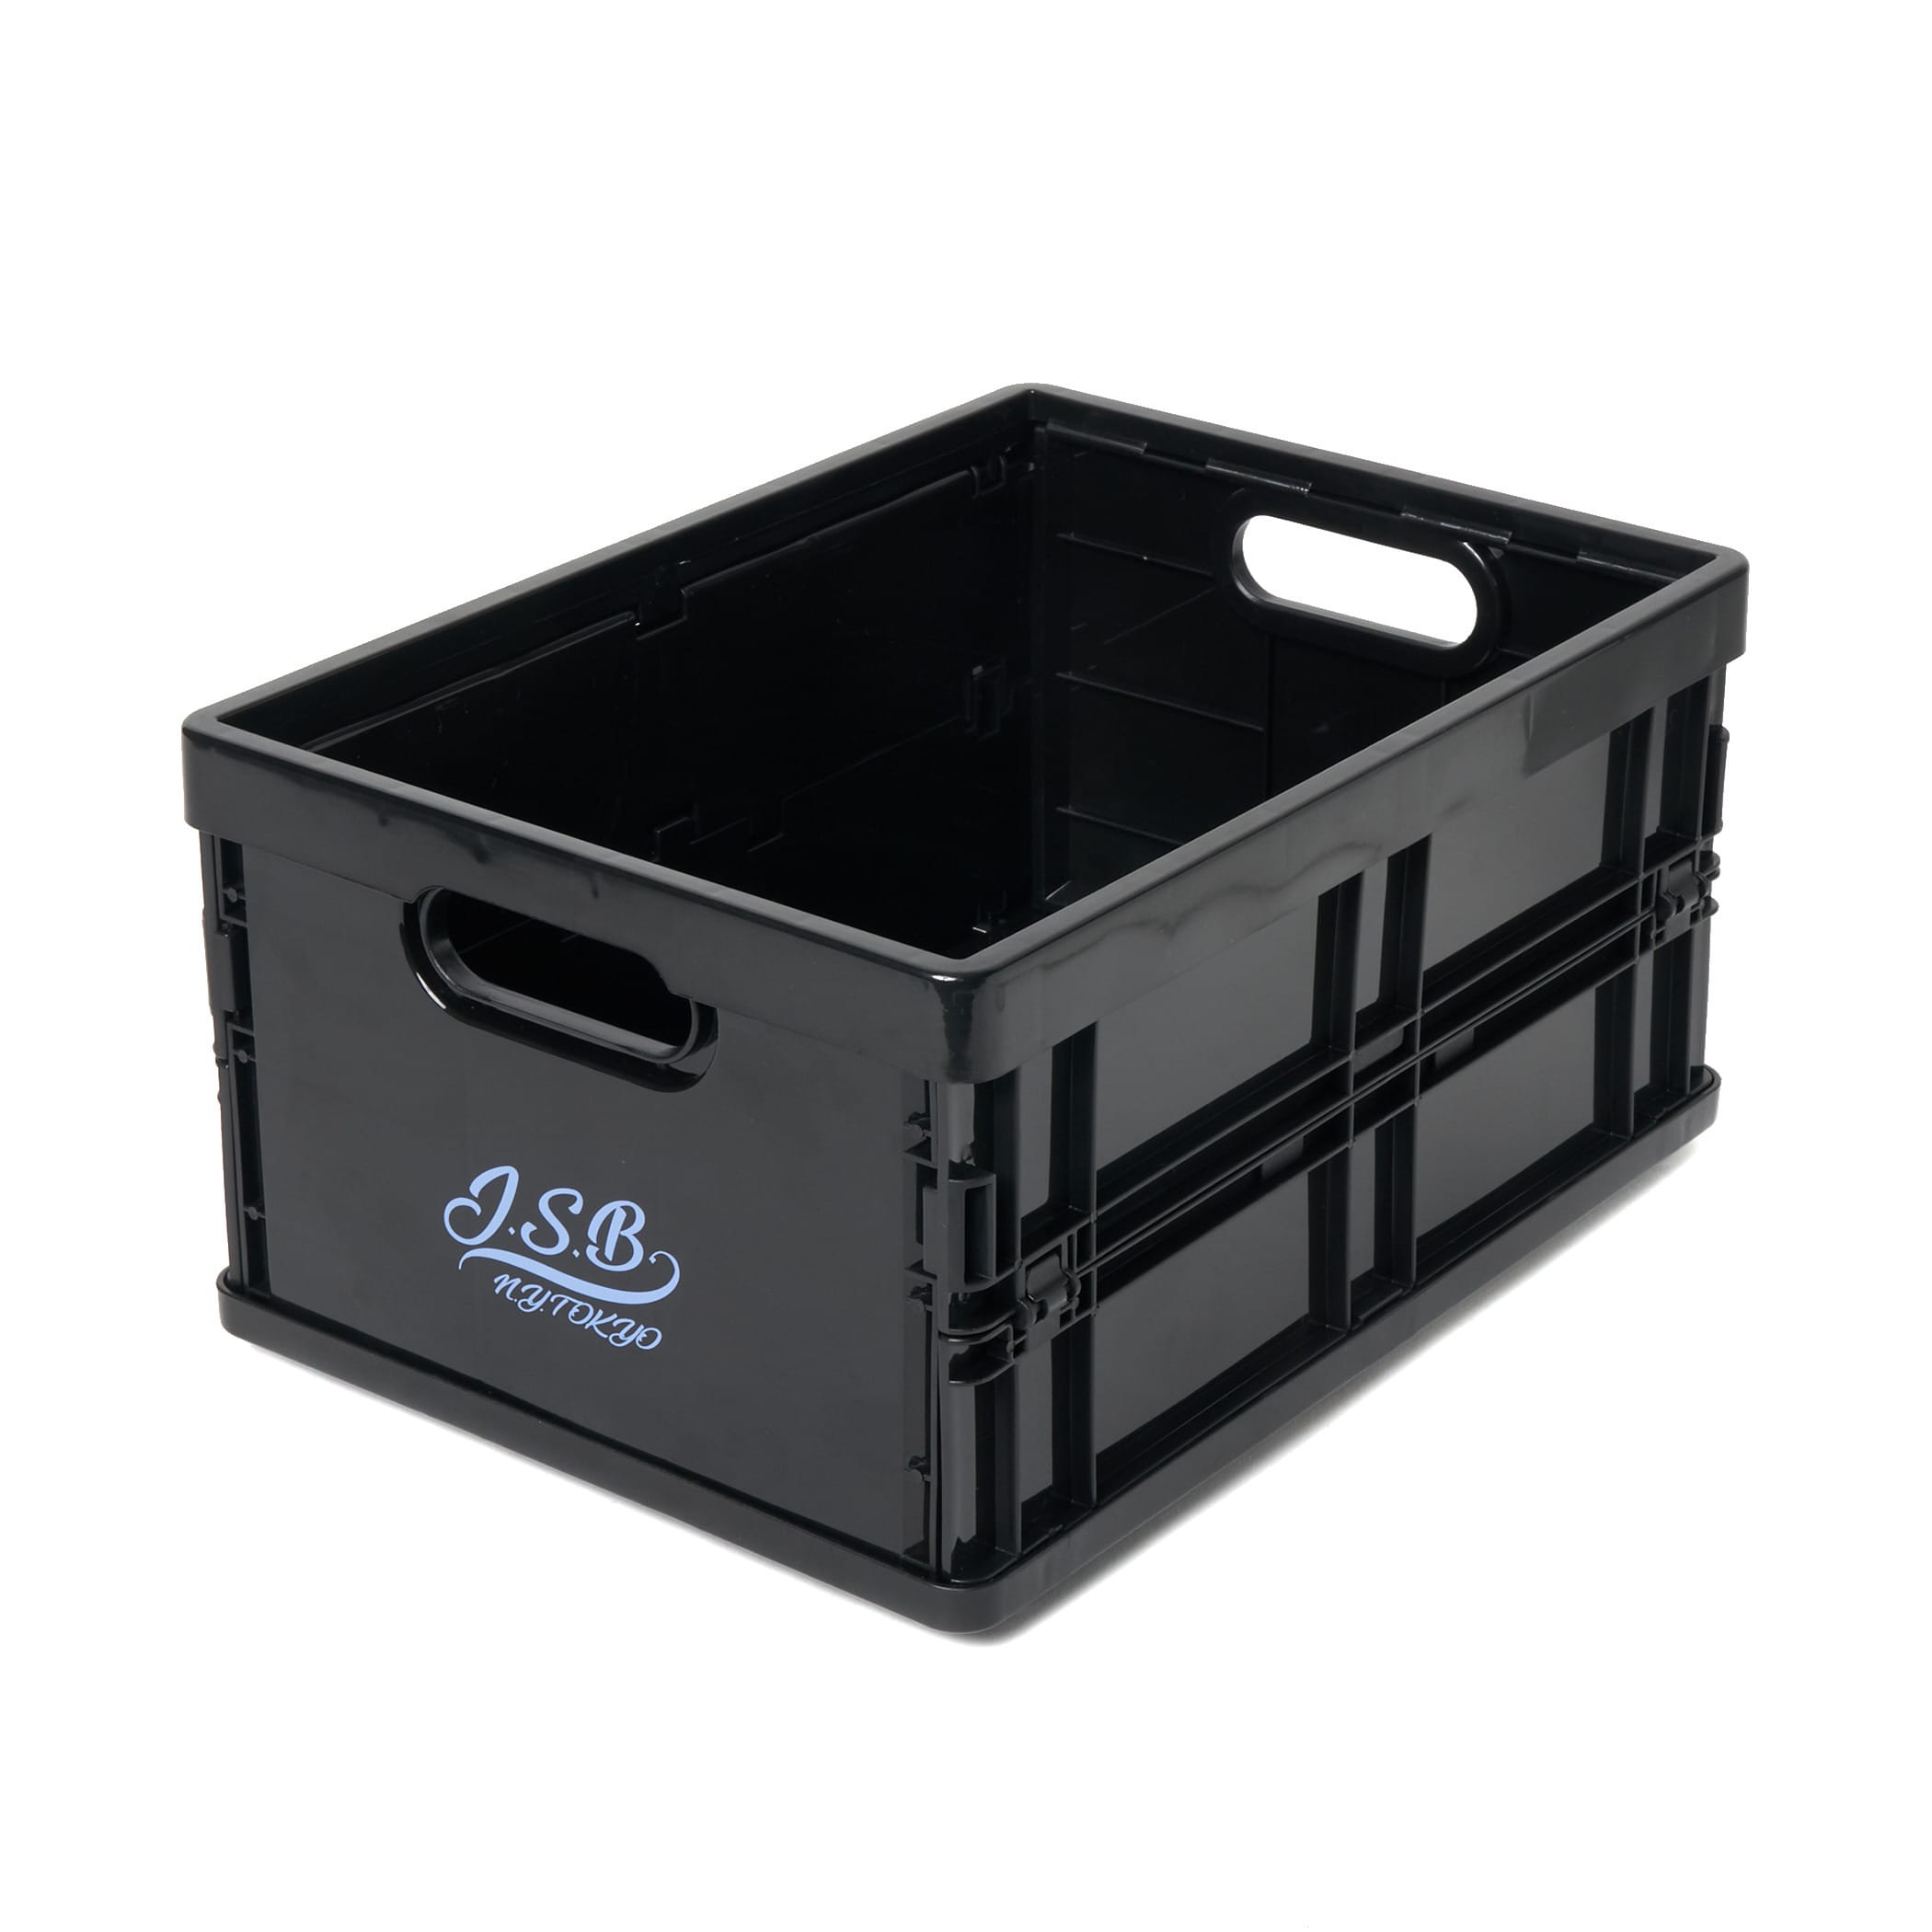 1991 Logo Container Box | J.S.B. | VERTICAL GARAGE OFFICIAL ONLINE STORE |  バーチカルガレージ公式通販サイト